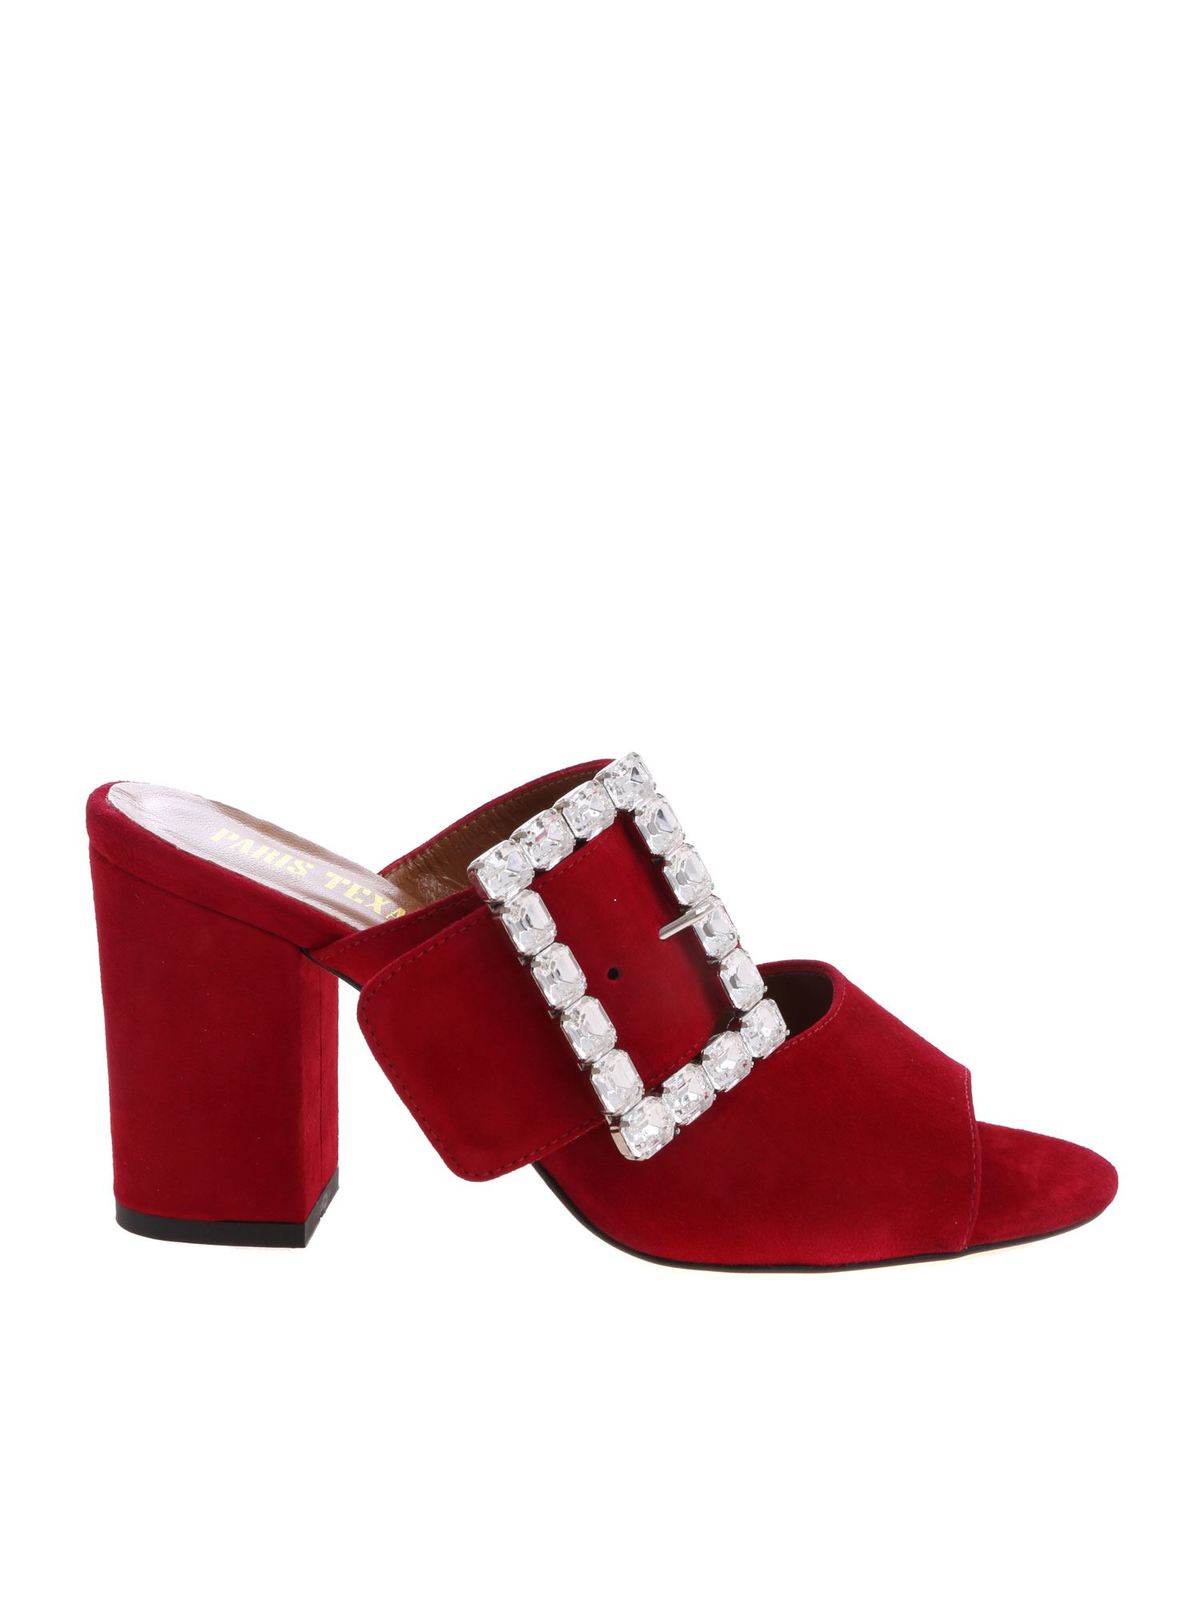 red suede mules